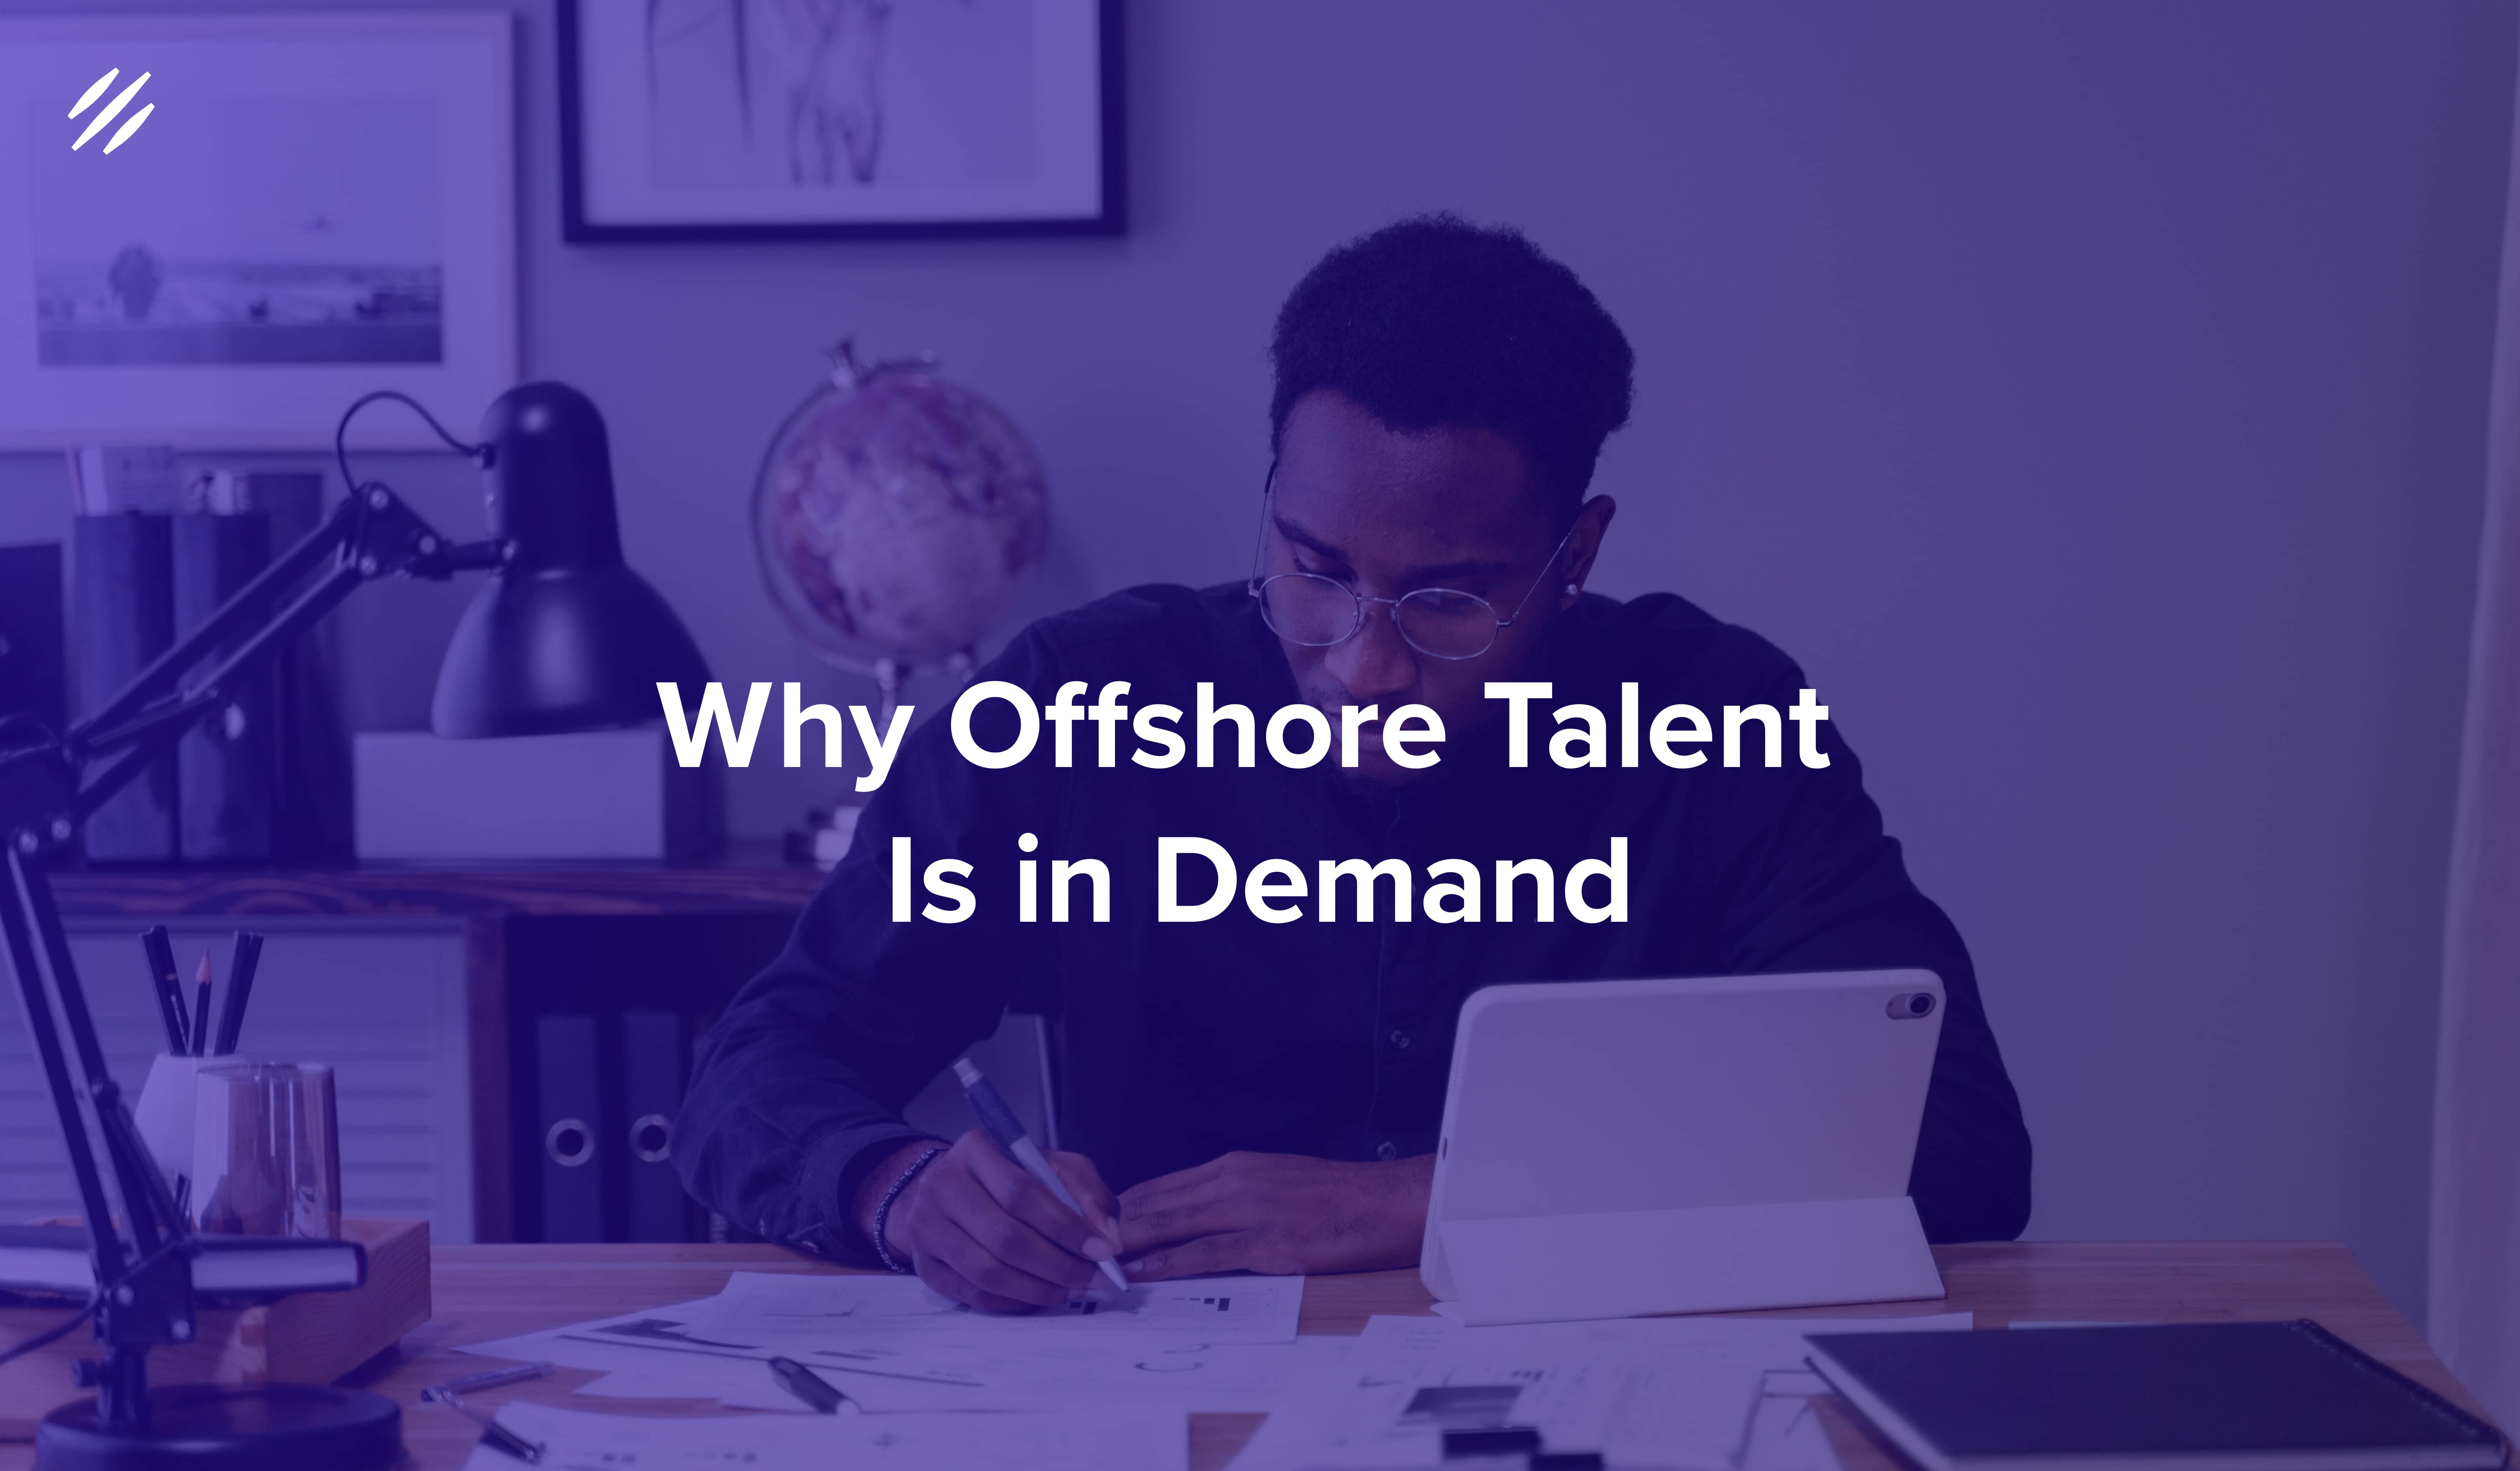 Top Reasons Why Offshore Talent Is In Demand